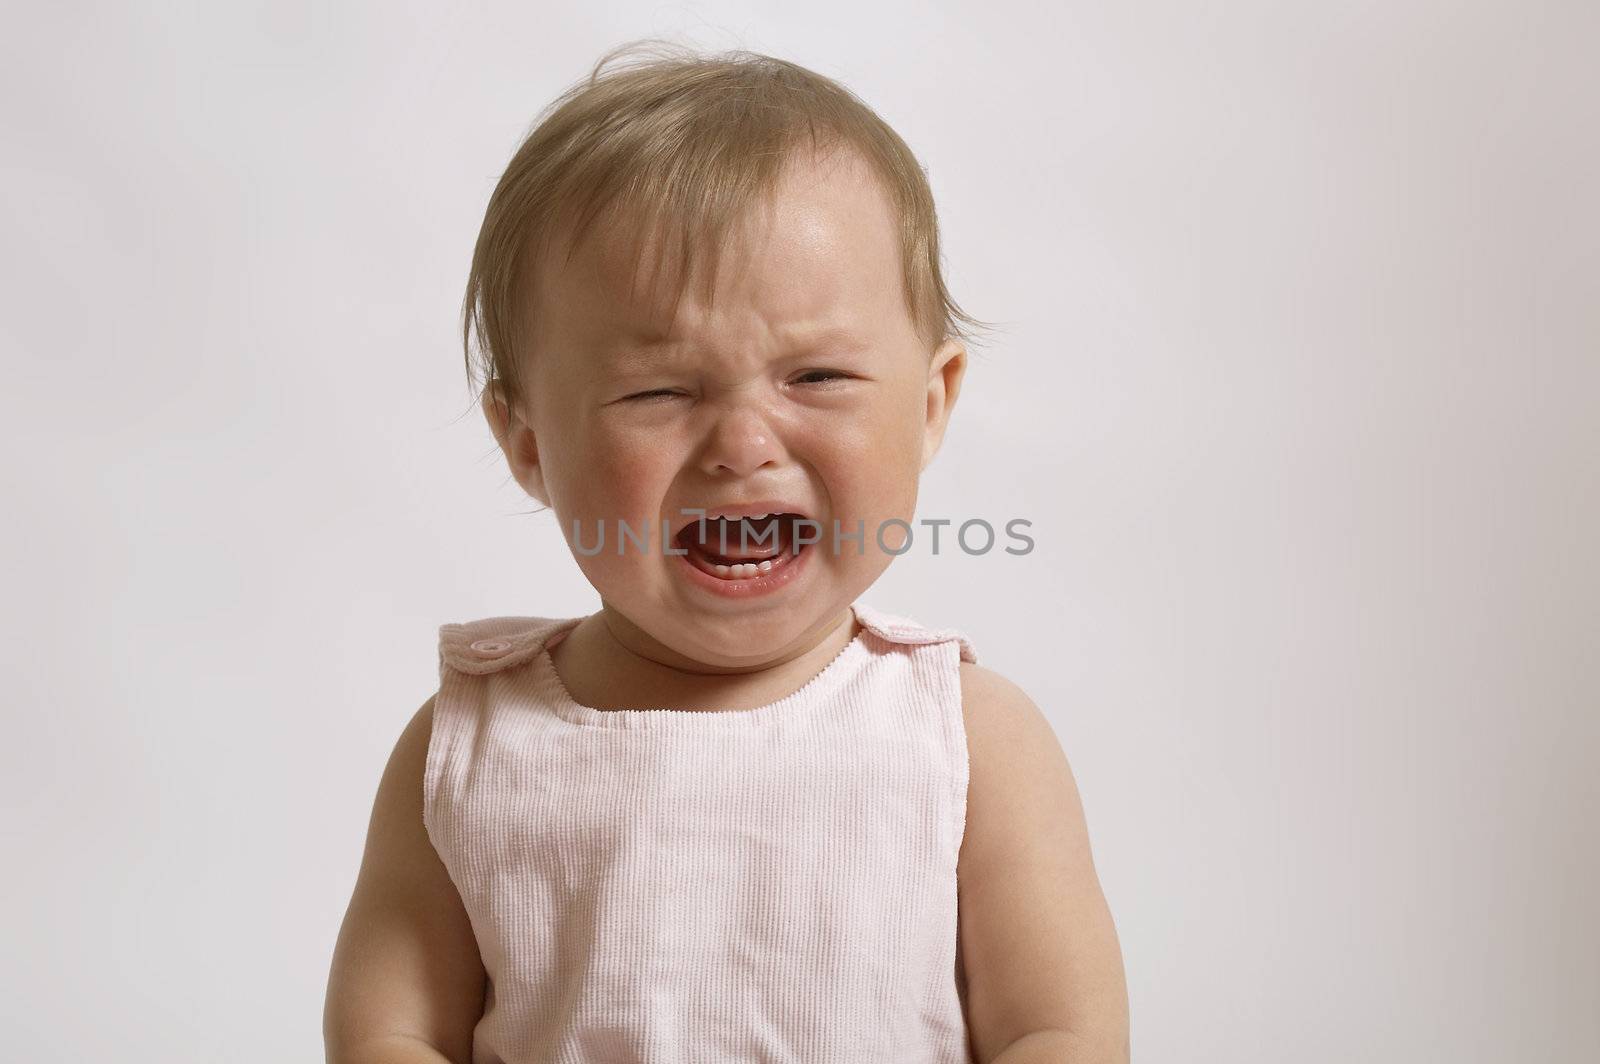 portrait of crying baby. little girl in the bad mood and to burst into tears